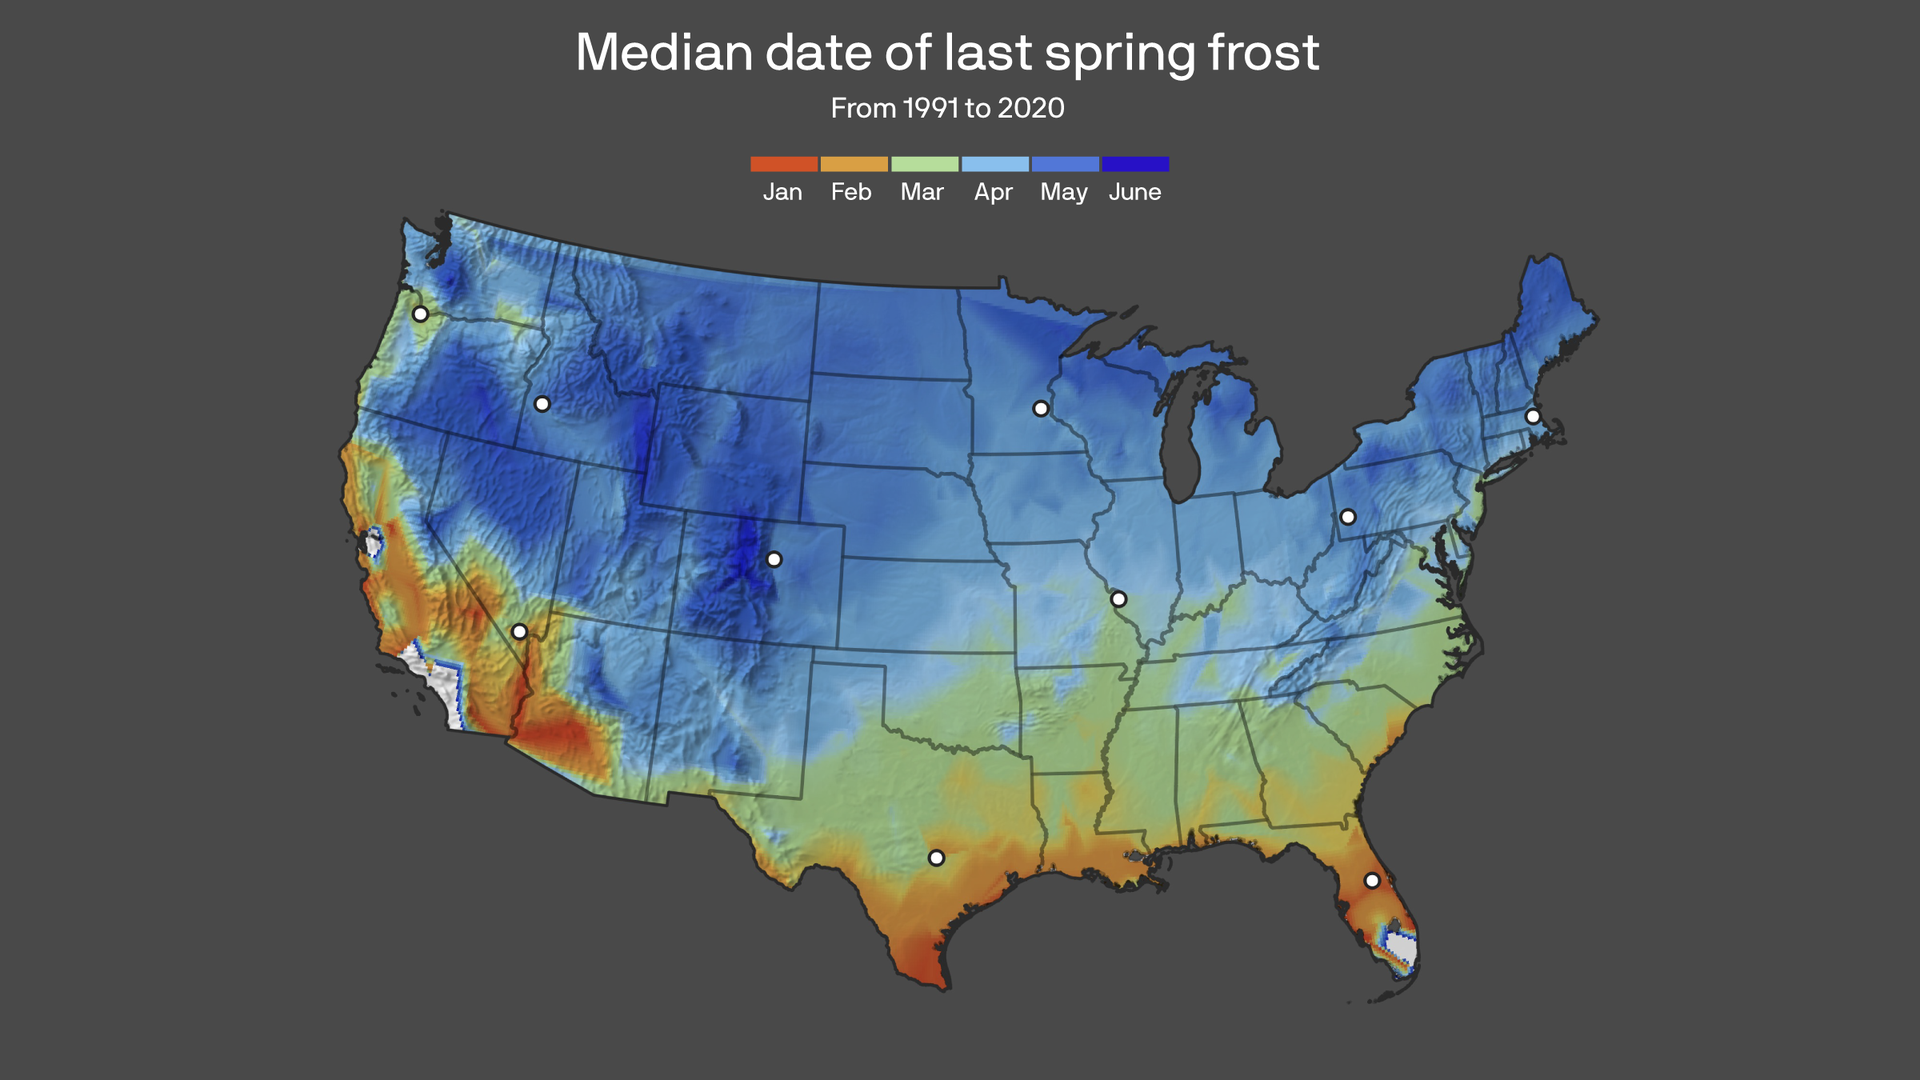 A map of the U.S. with the median dates for the last spring frost. 